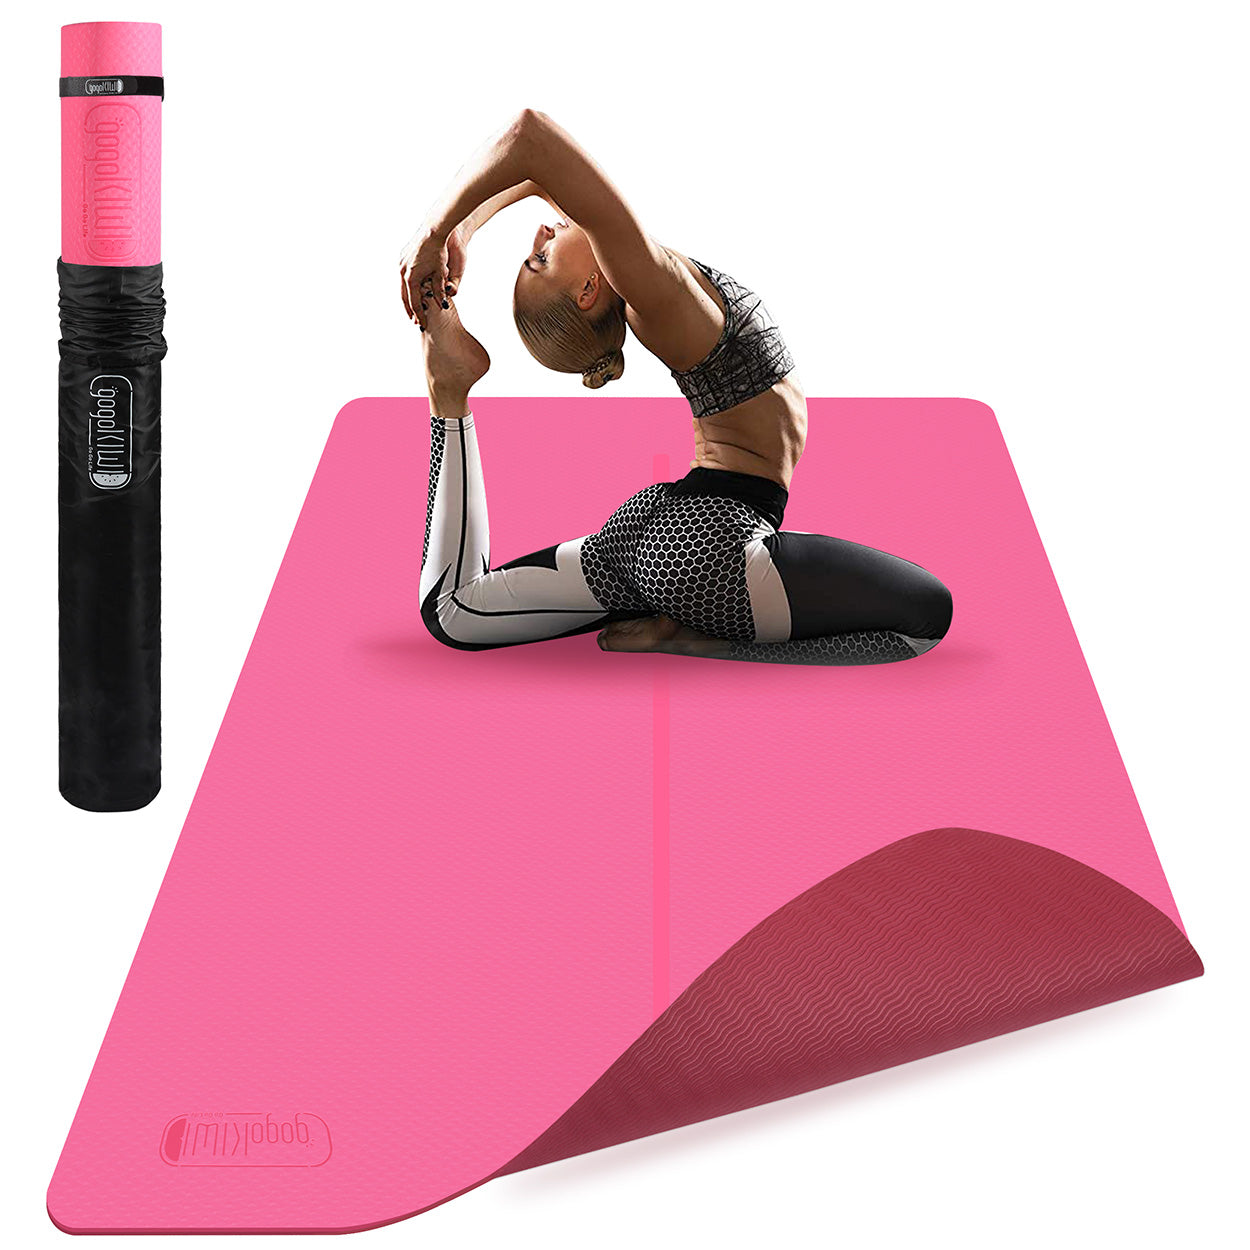  Gogokiwi Large Yoga Mat (6'x4') Extra Wide 1/4 Inch Thick  Workout Mat for Women Men, Non Slip Exercise Mat for Home Gym, Yoga,  Pilates, Stretching & Fitness (Grey Shadows) 